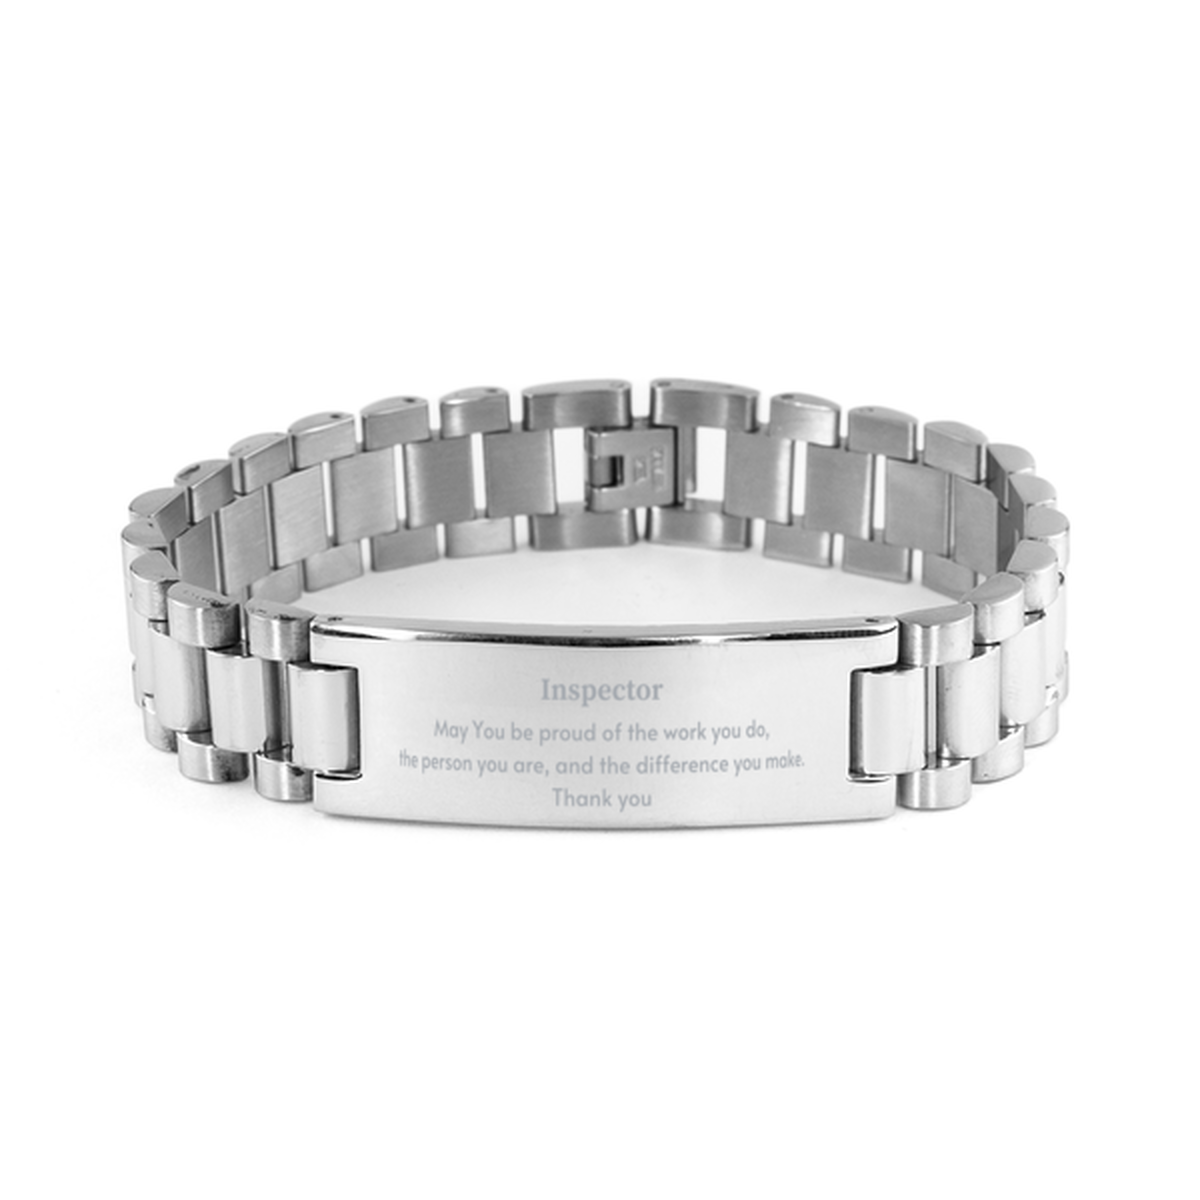 Heartwarming Ladder Stainless Steel Bracelet Retirement Coworkers Gifts for Inspector, Inspector May You be proud of the work you do, the person you are Gifts for Boss Men Women Friends